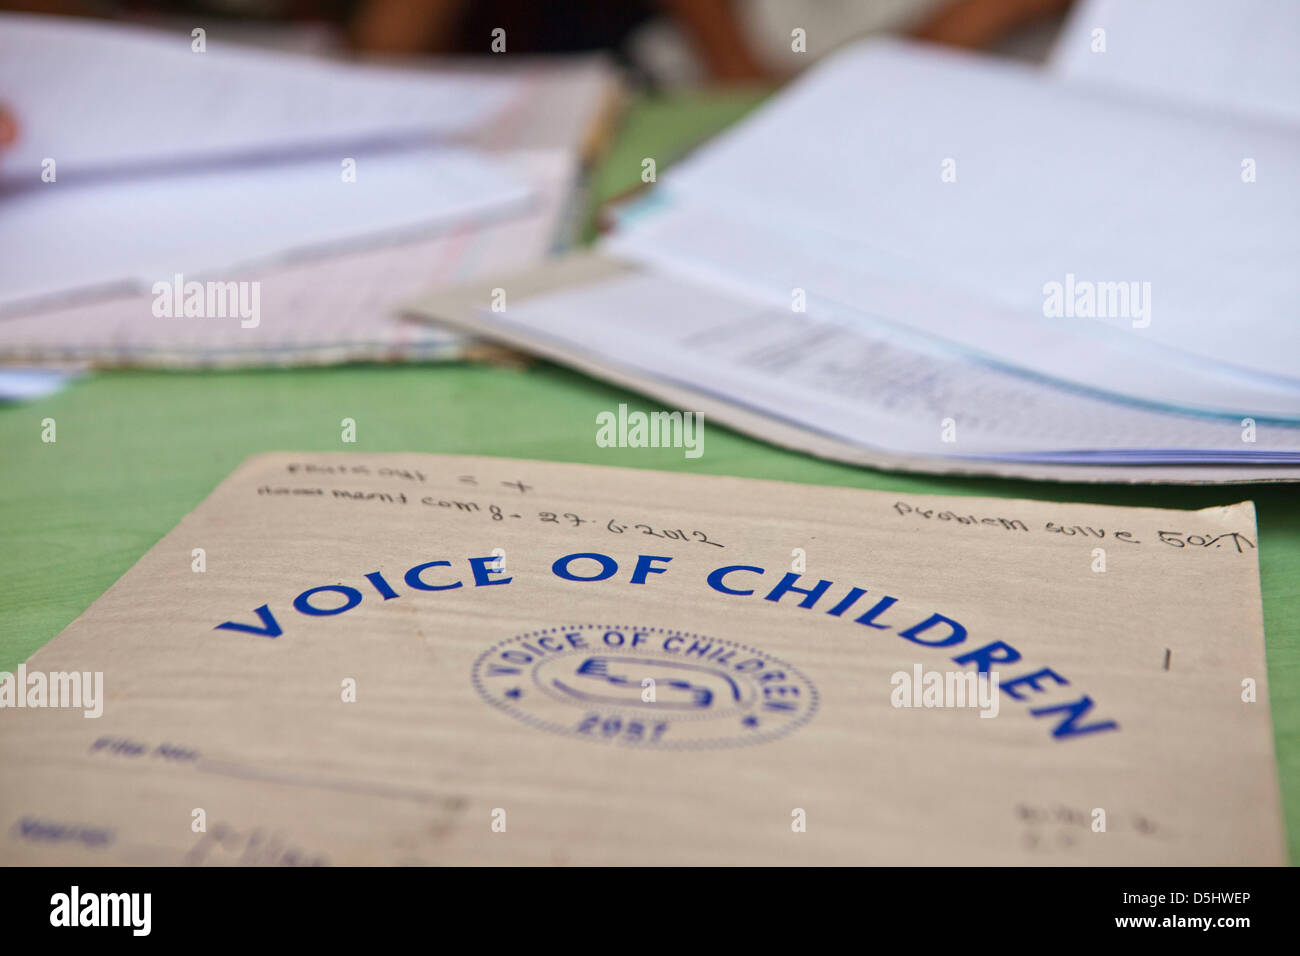 Report in a school class in the Voice of Children rehabilitation center in Nepal. Charity working with kids at risk of abuse. Stock Photo